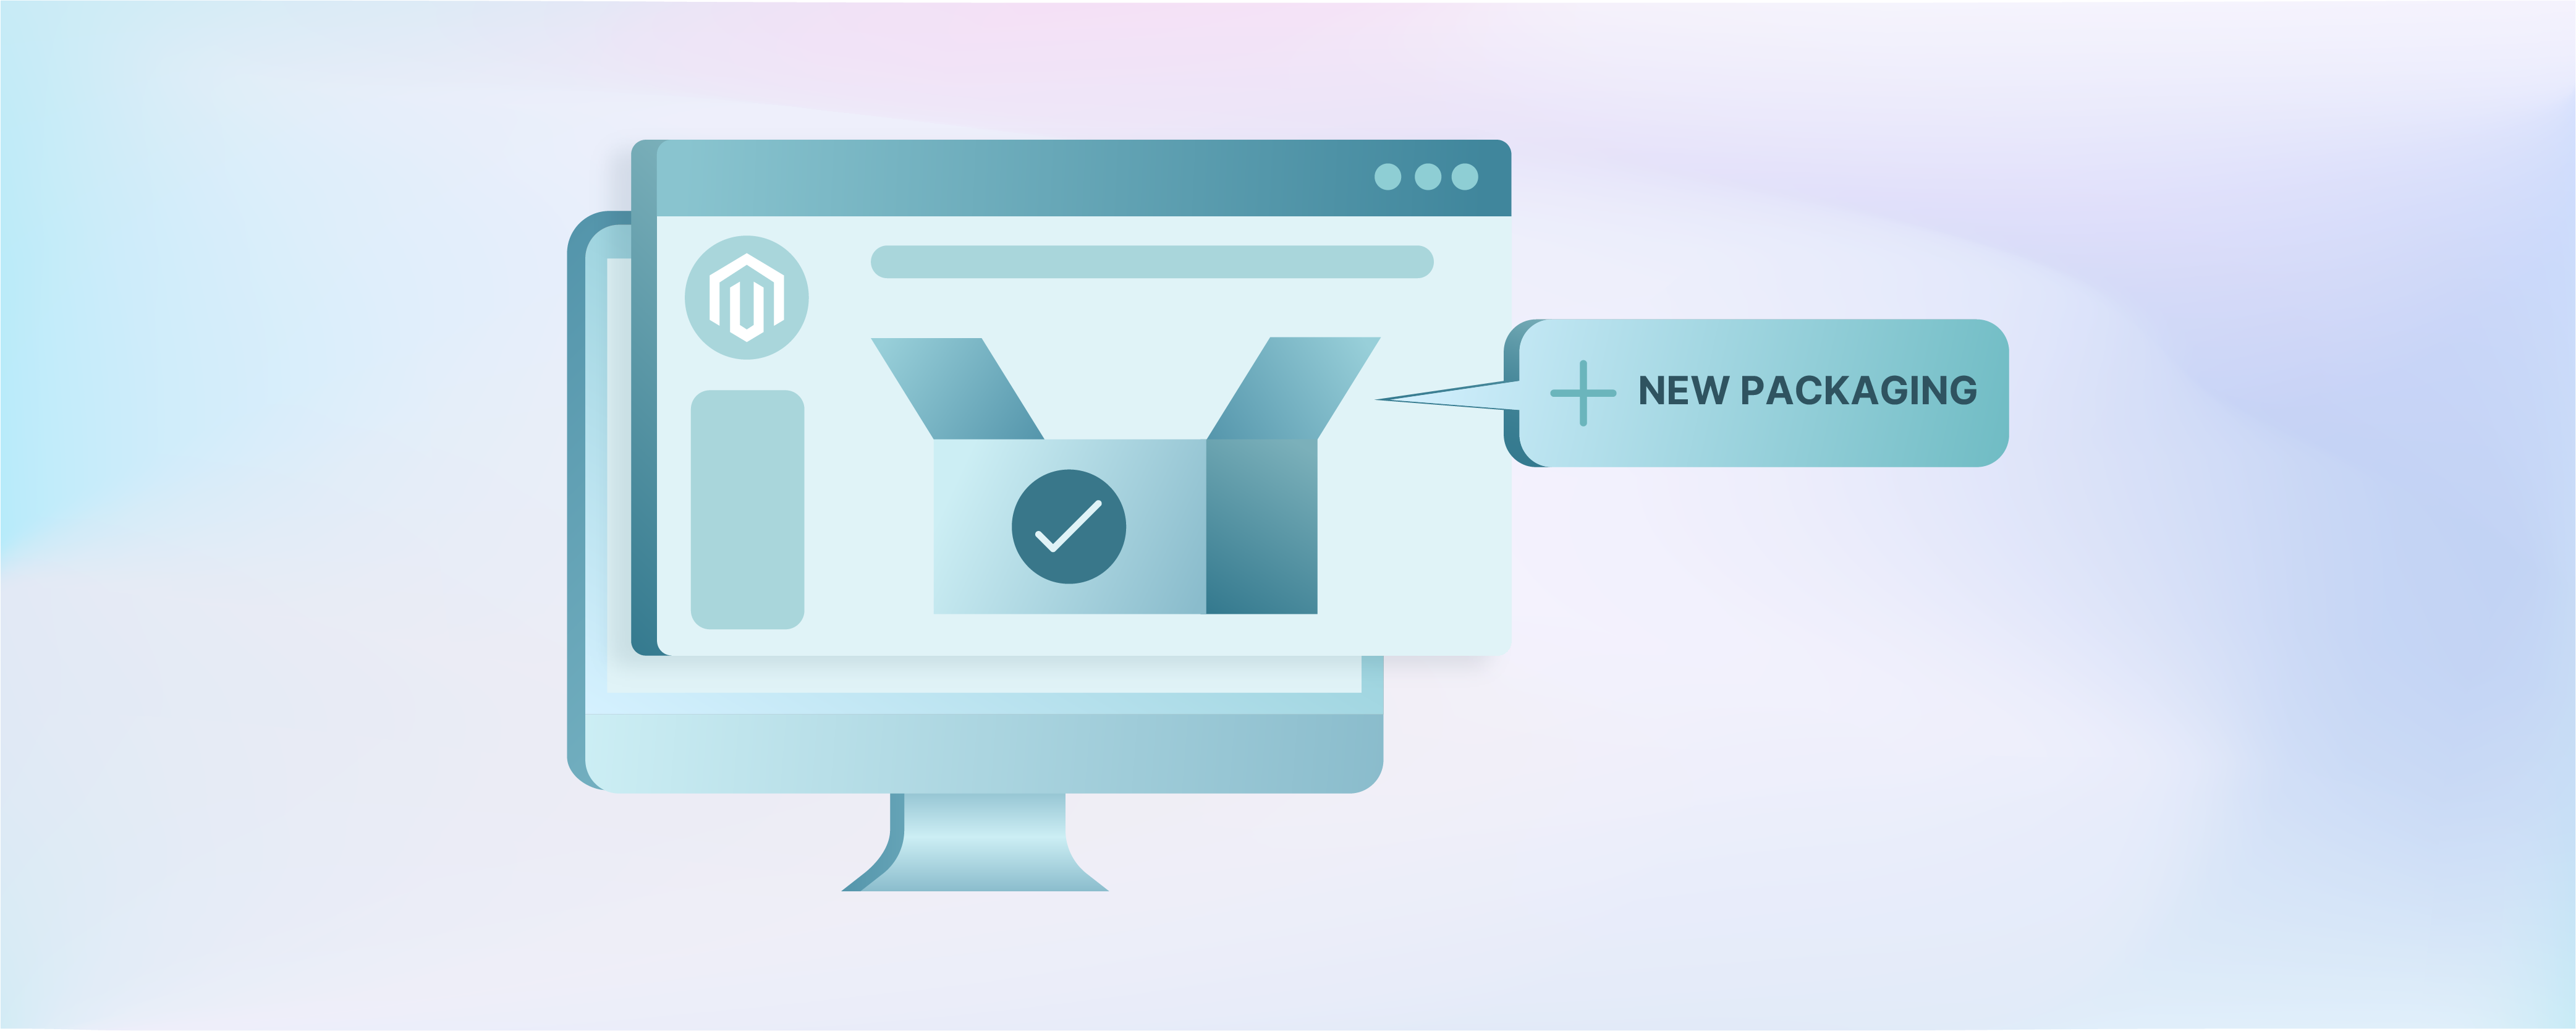 2-Step Guide to Add a Magento 2 Packaging Option